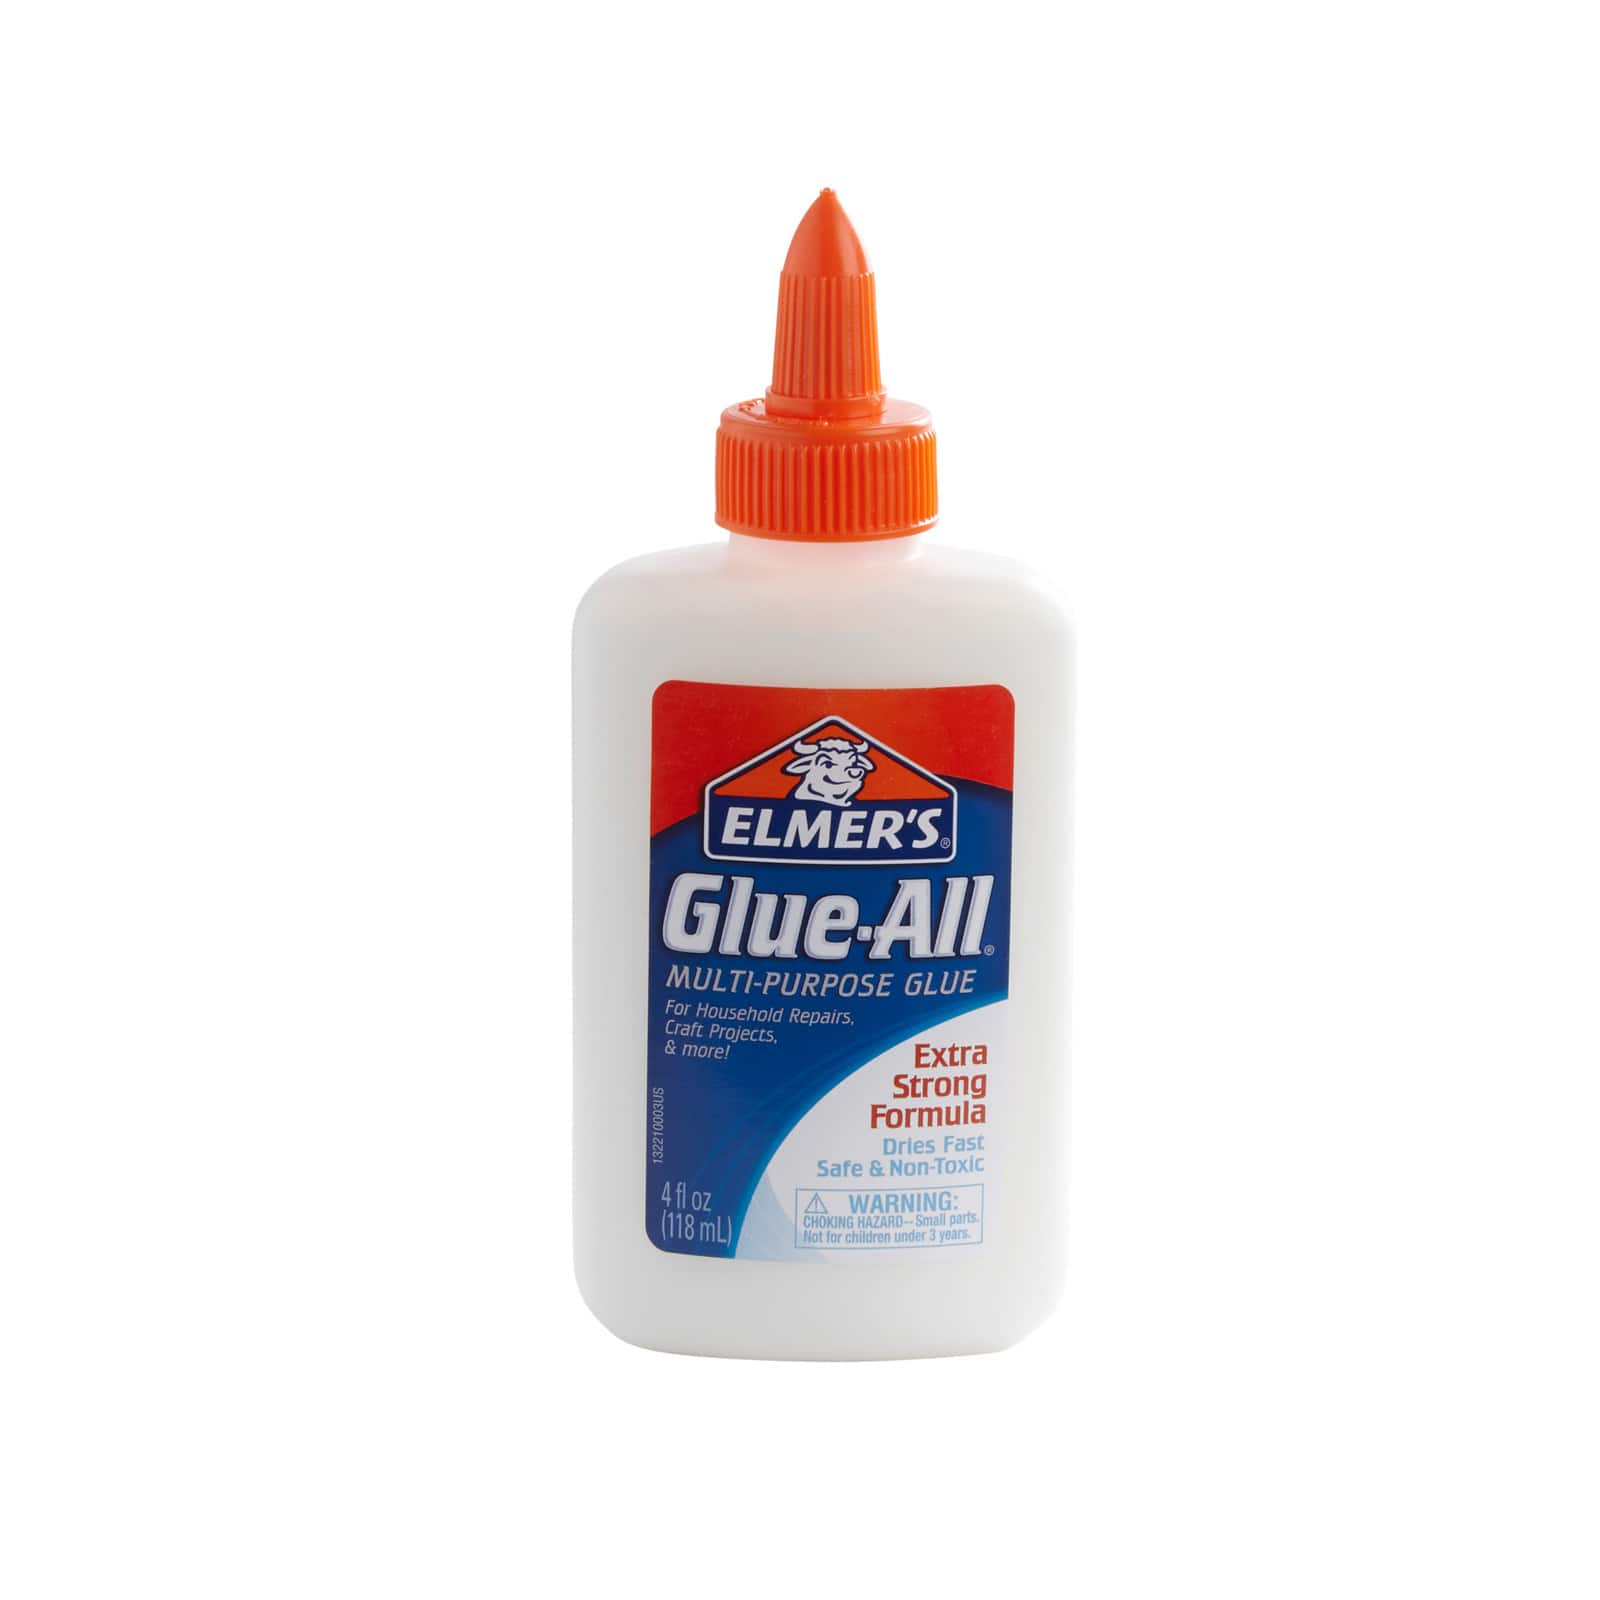 How to Use White Glue for Cosplay: Adhesive Series